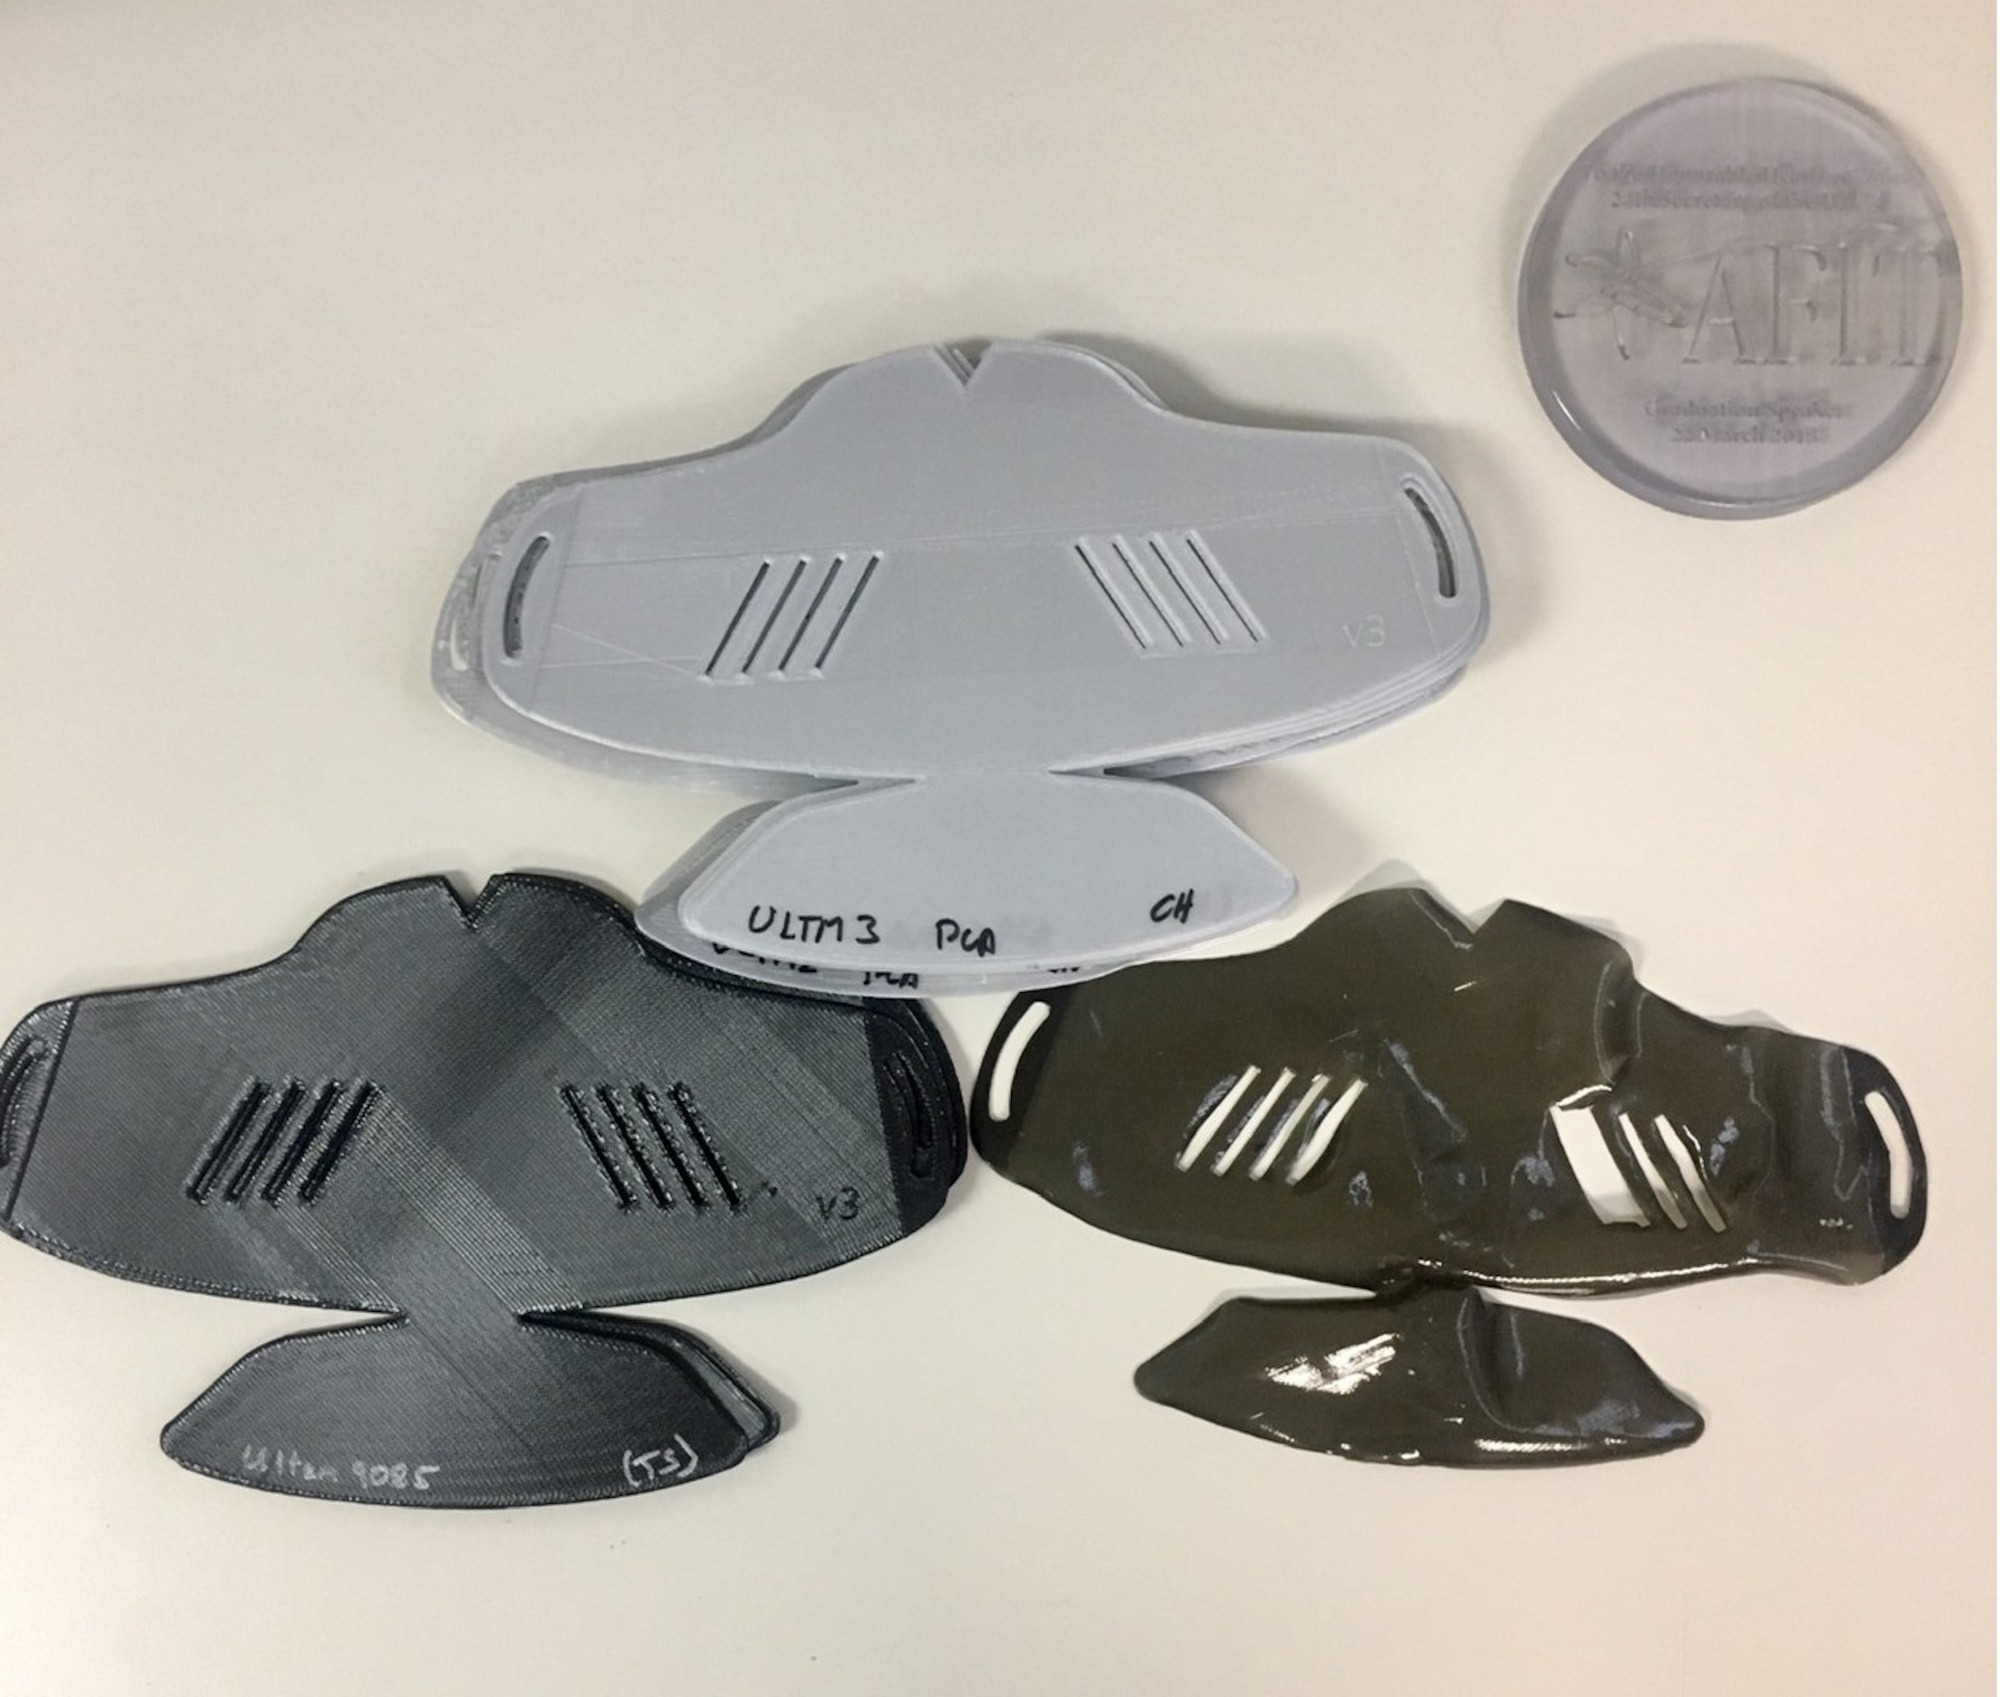 Initial prototypes that were 3D printed with various material types. (Courtesy photo)